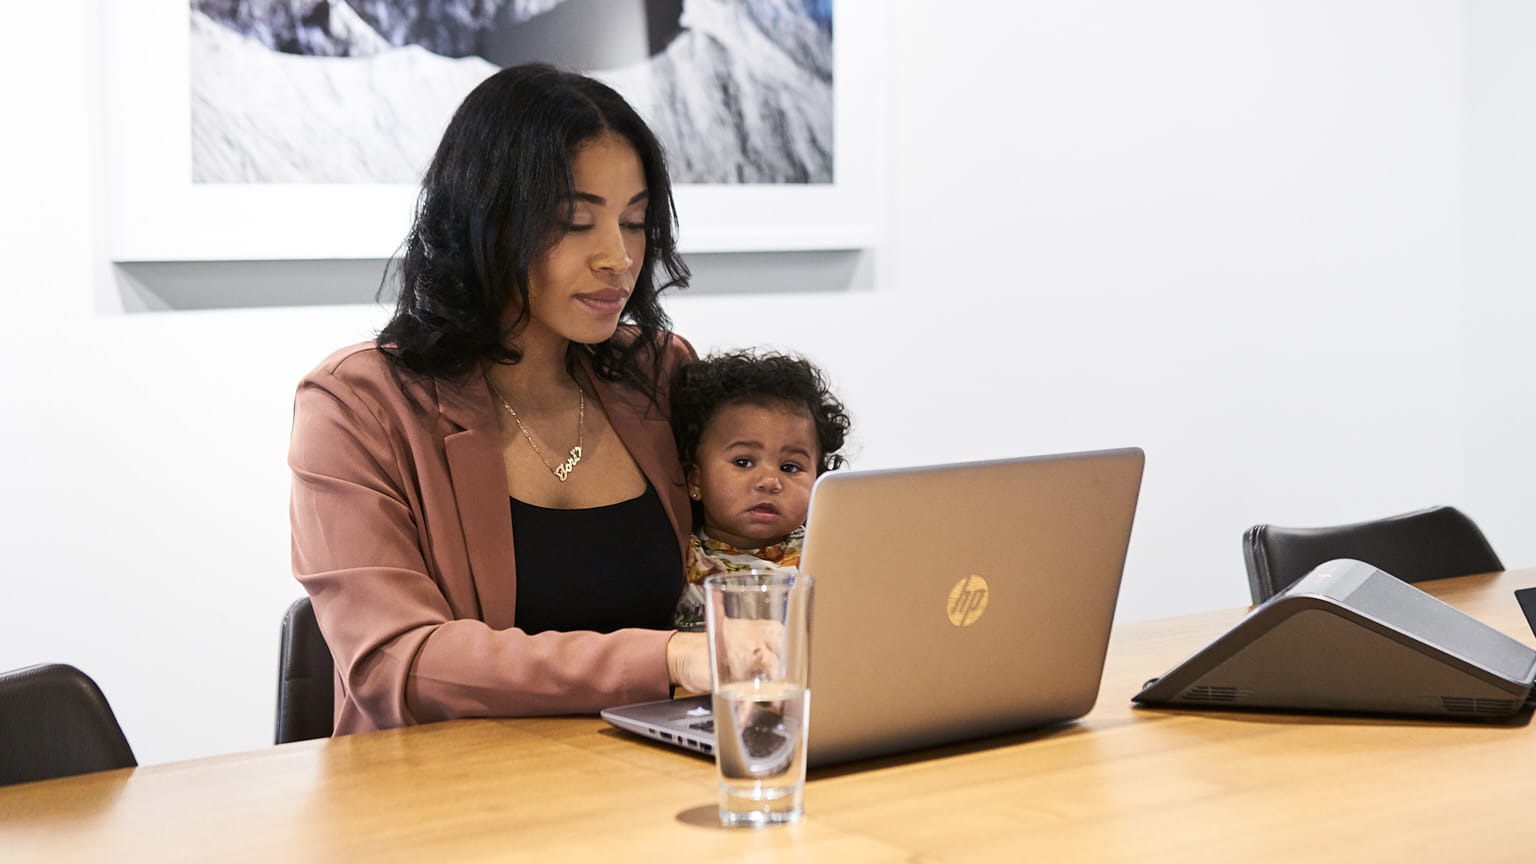 Victoria founded a brand and creative consulting agency five years ago. She looks forward to continuing to grow her business and plans to start a family one day.